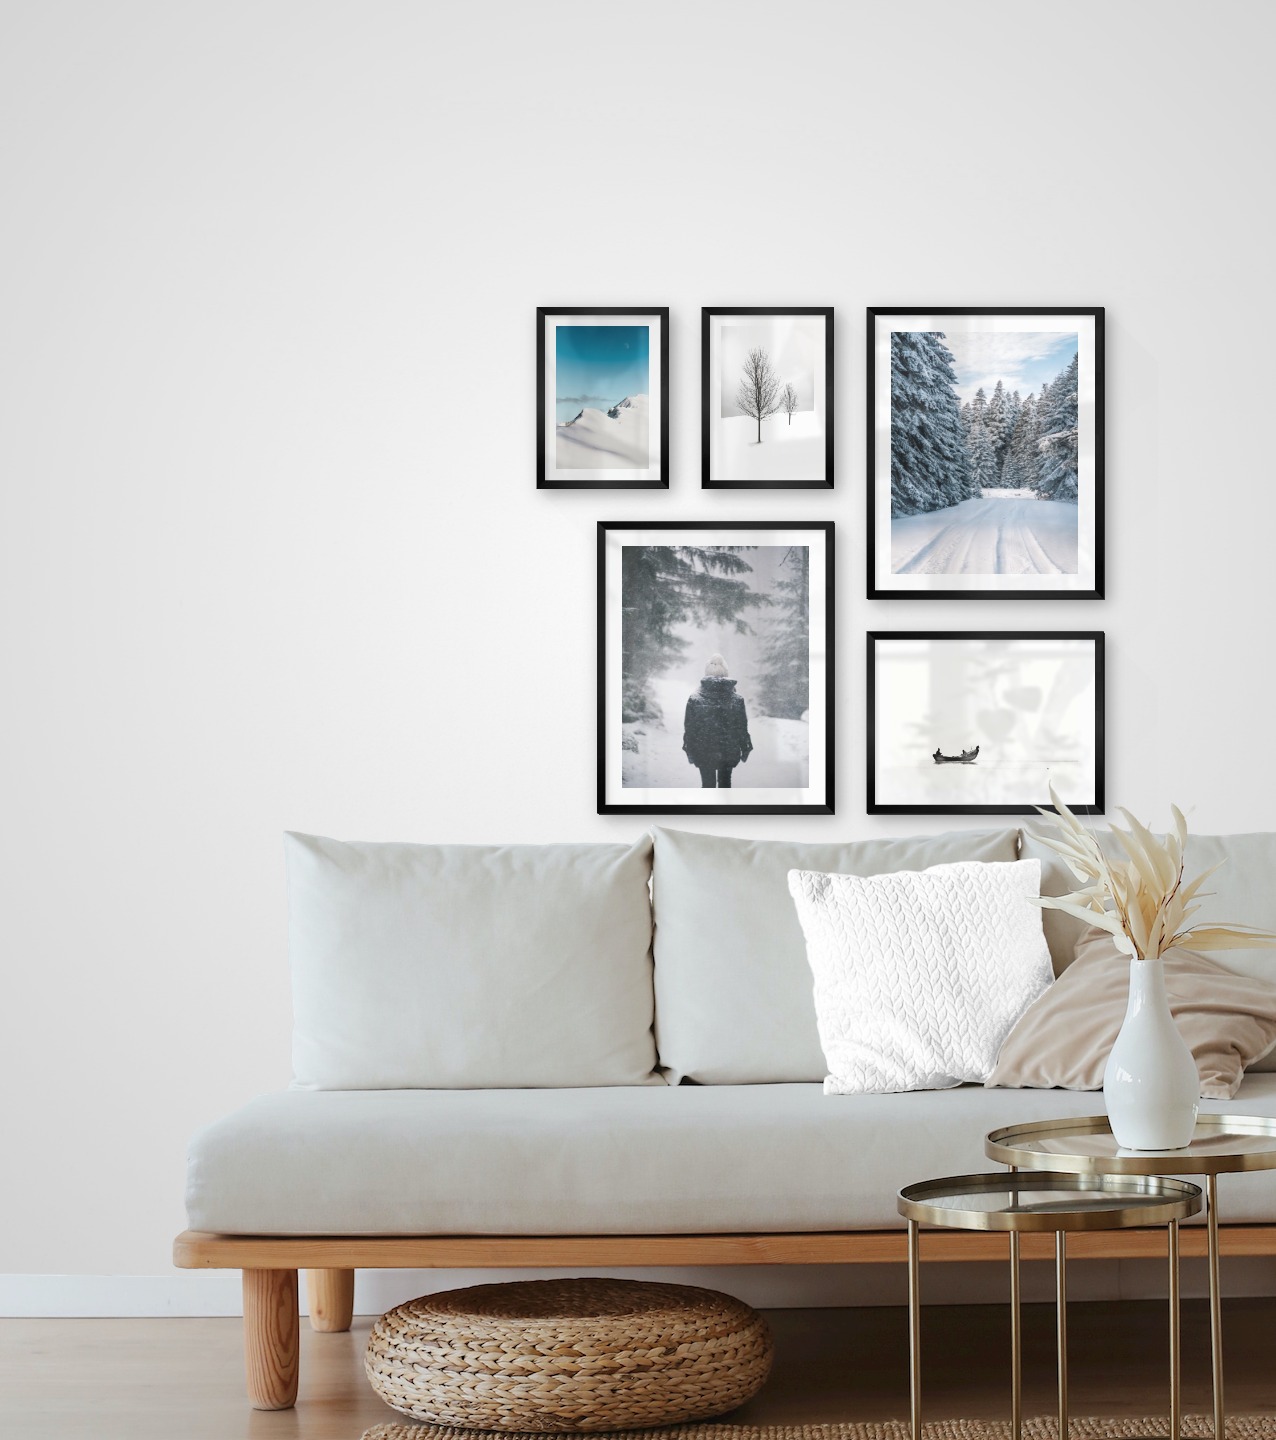 Gallery wall with picture frames in black in sizes 21x30, 40x50 and 30x40 with prints "Trees in the snow", "Snowy mountain peaks", "Person in the snow", "Snowy road" and "People in boat"